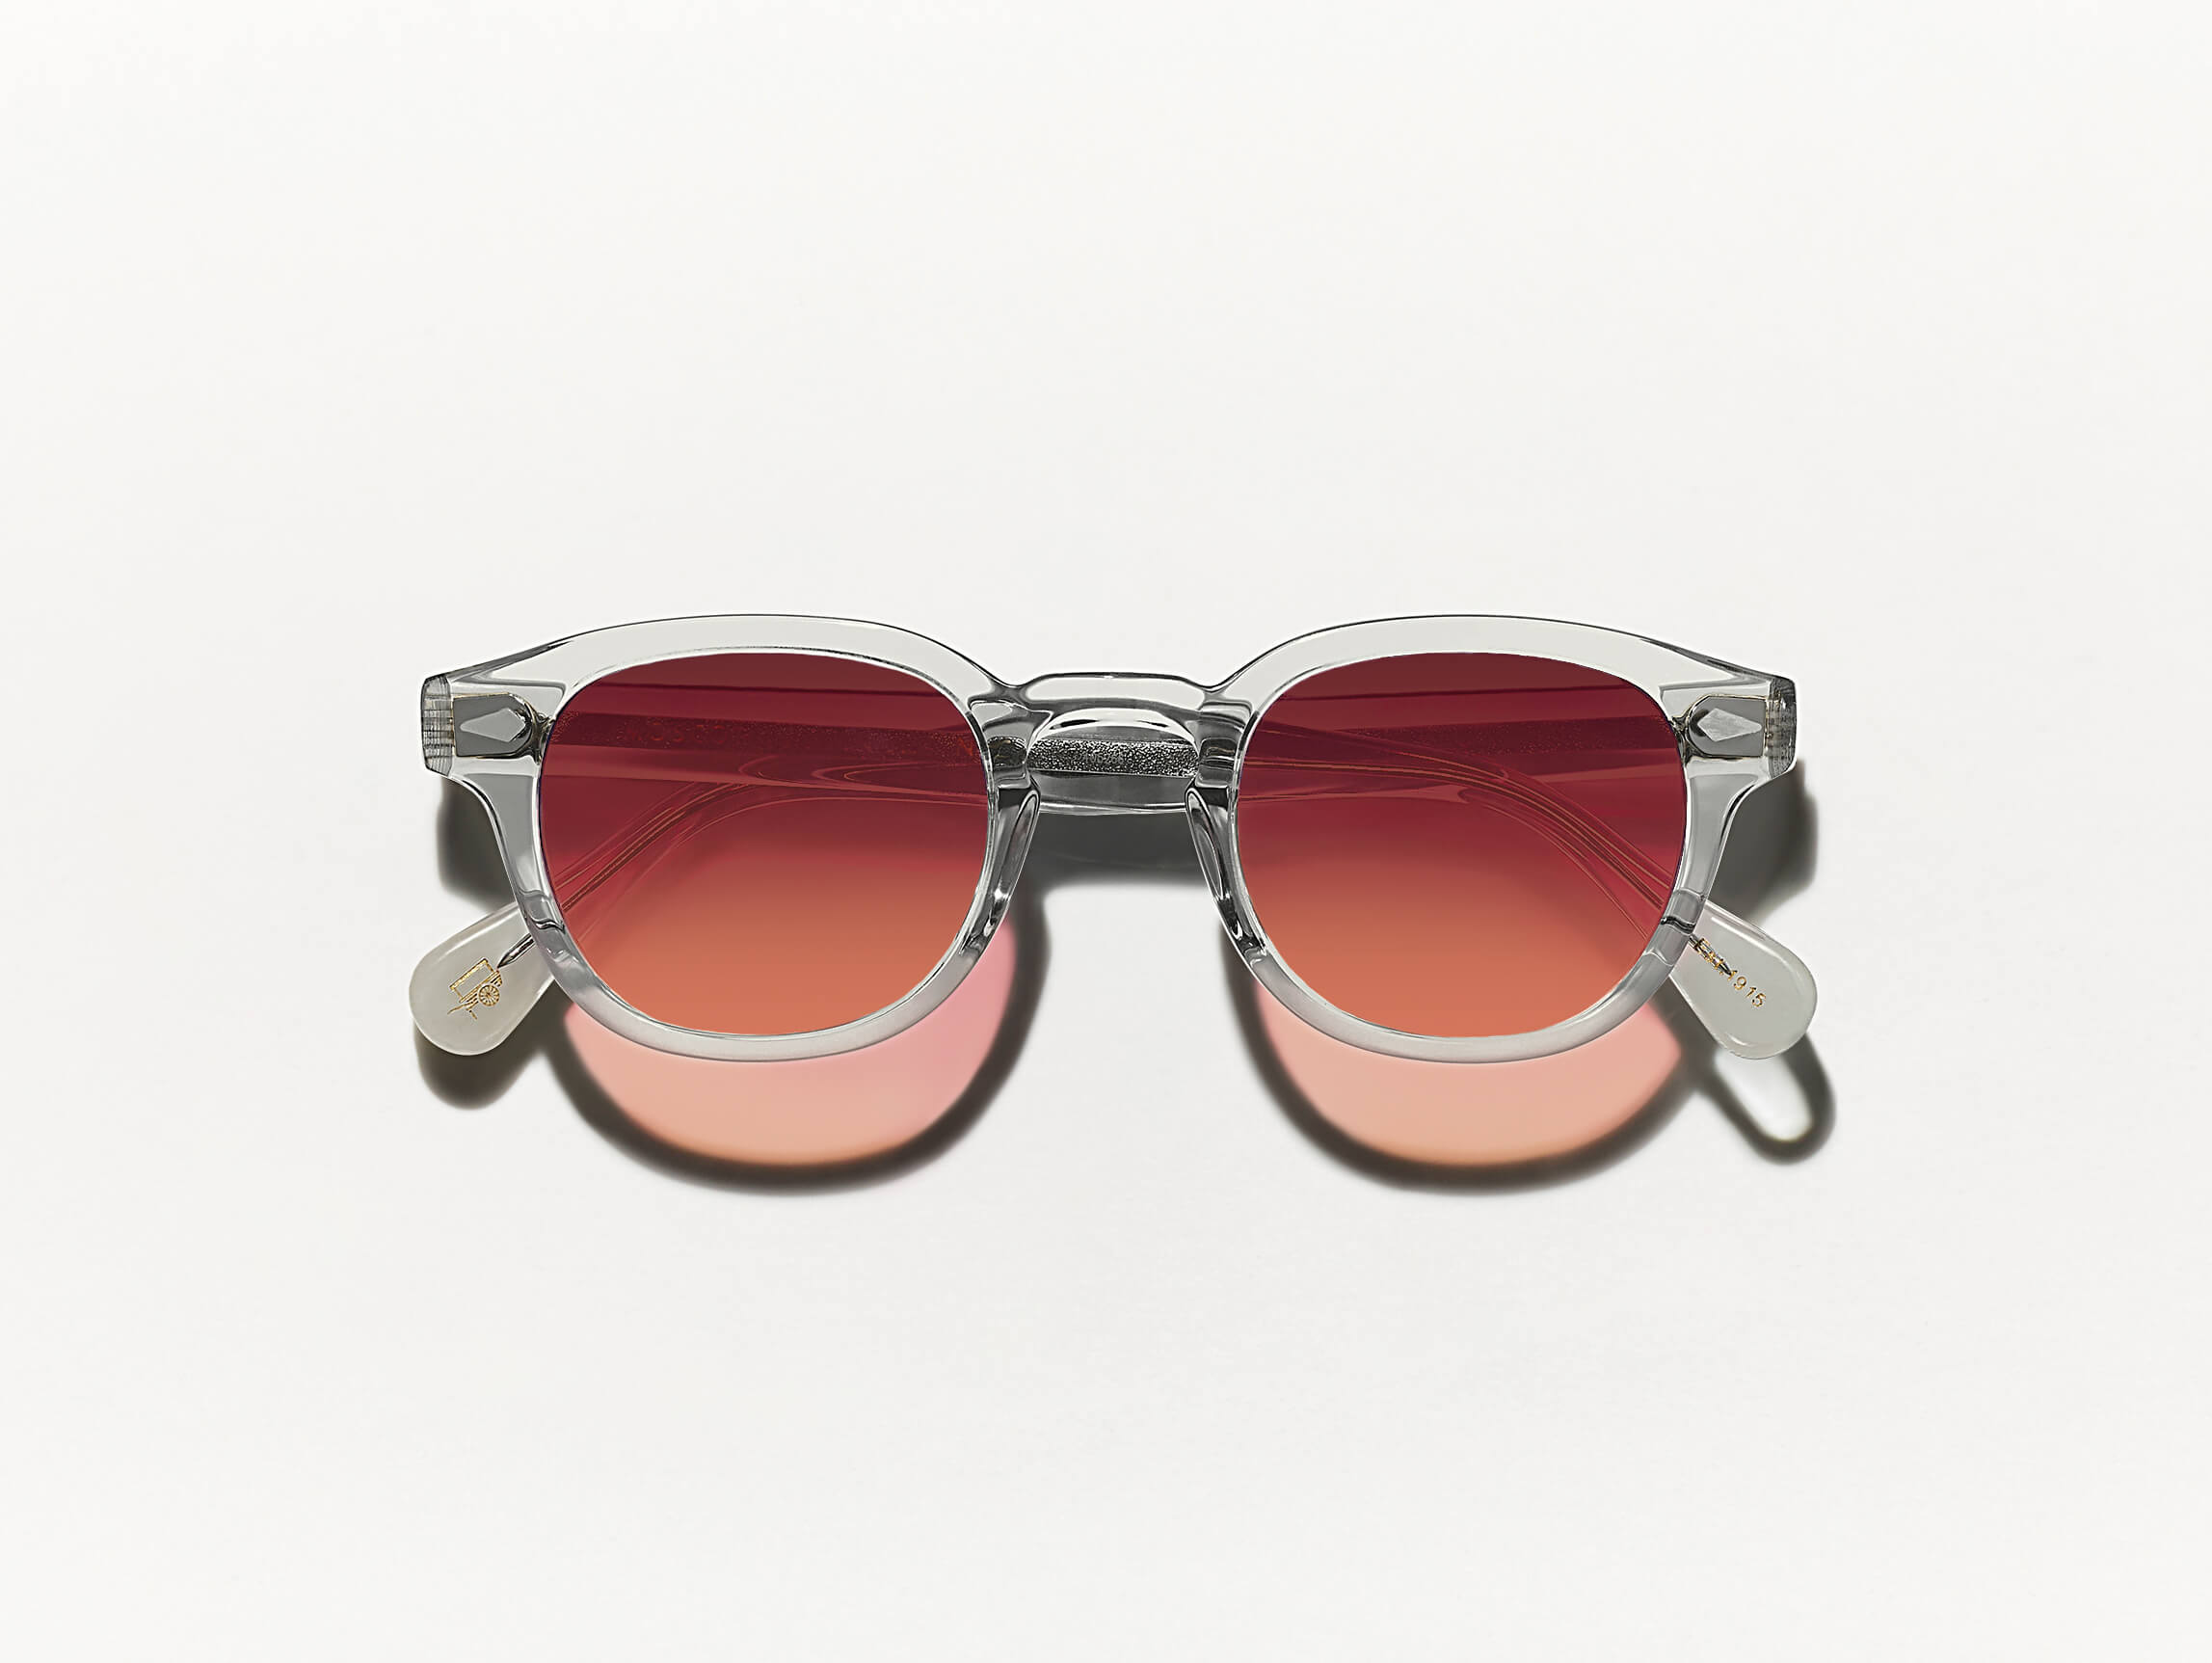 The LEMTOSH Light Grey with Cabernet Tinted Lenses